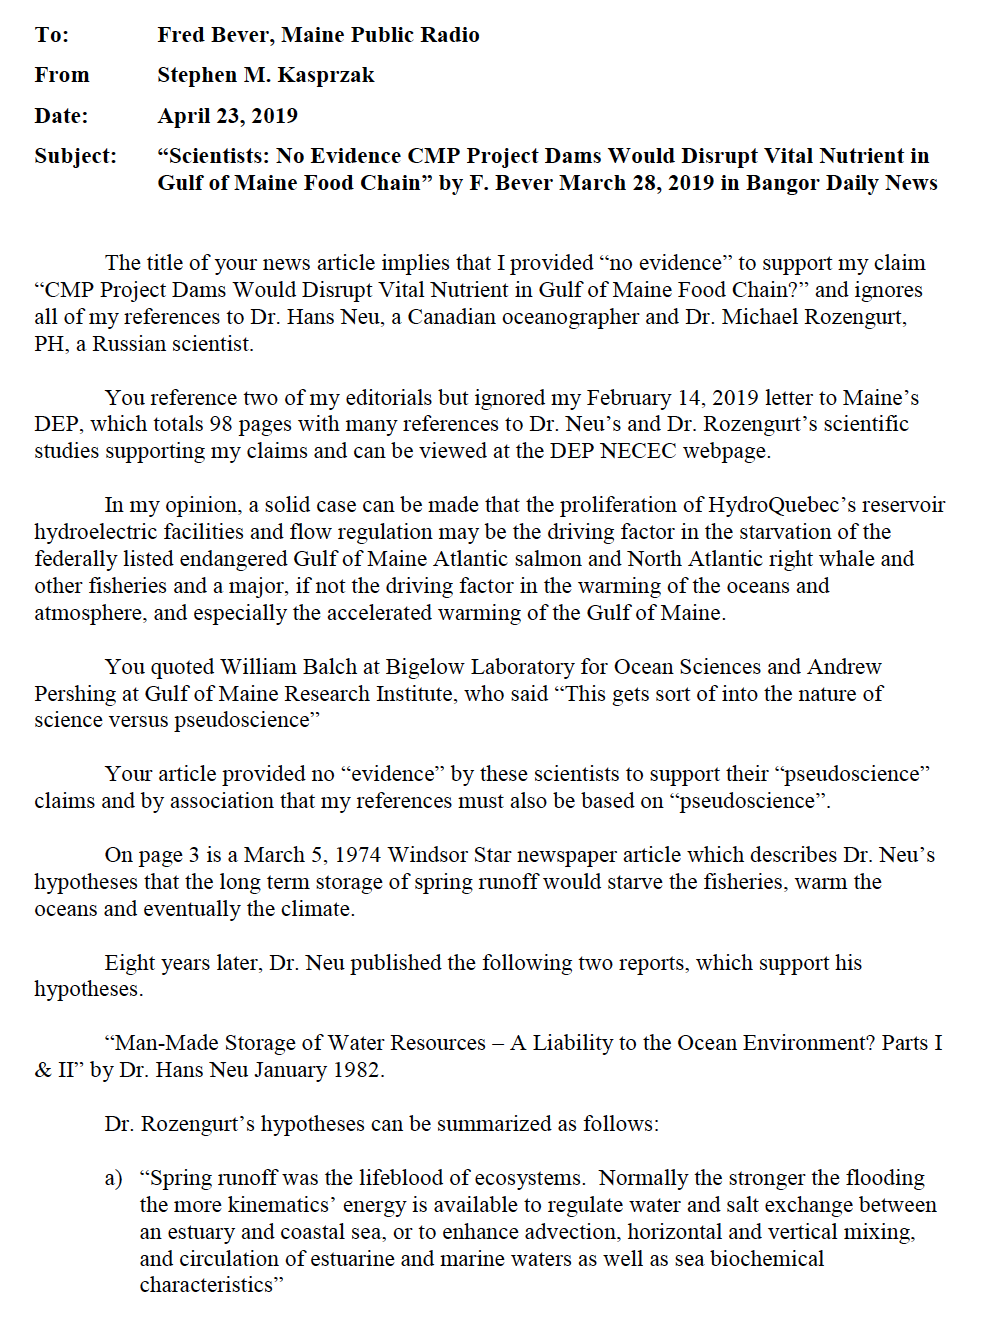 Read more about the article Kasprzak’s Response to “Scientists: No Evidence CMP Project Dams Would Disrupt Vital Nutrient in Gulf of Maine Food Chain” by F. Bever March 28, 2019 in Bangor Daily News